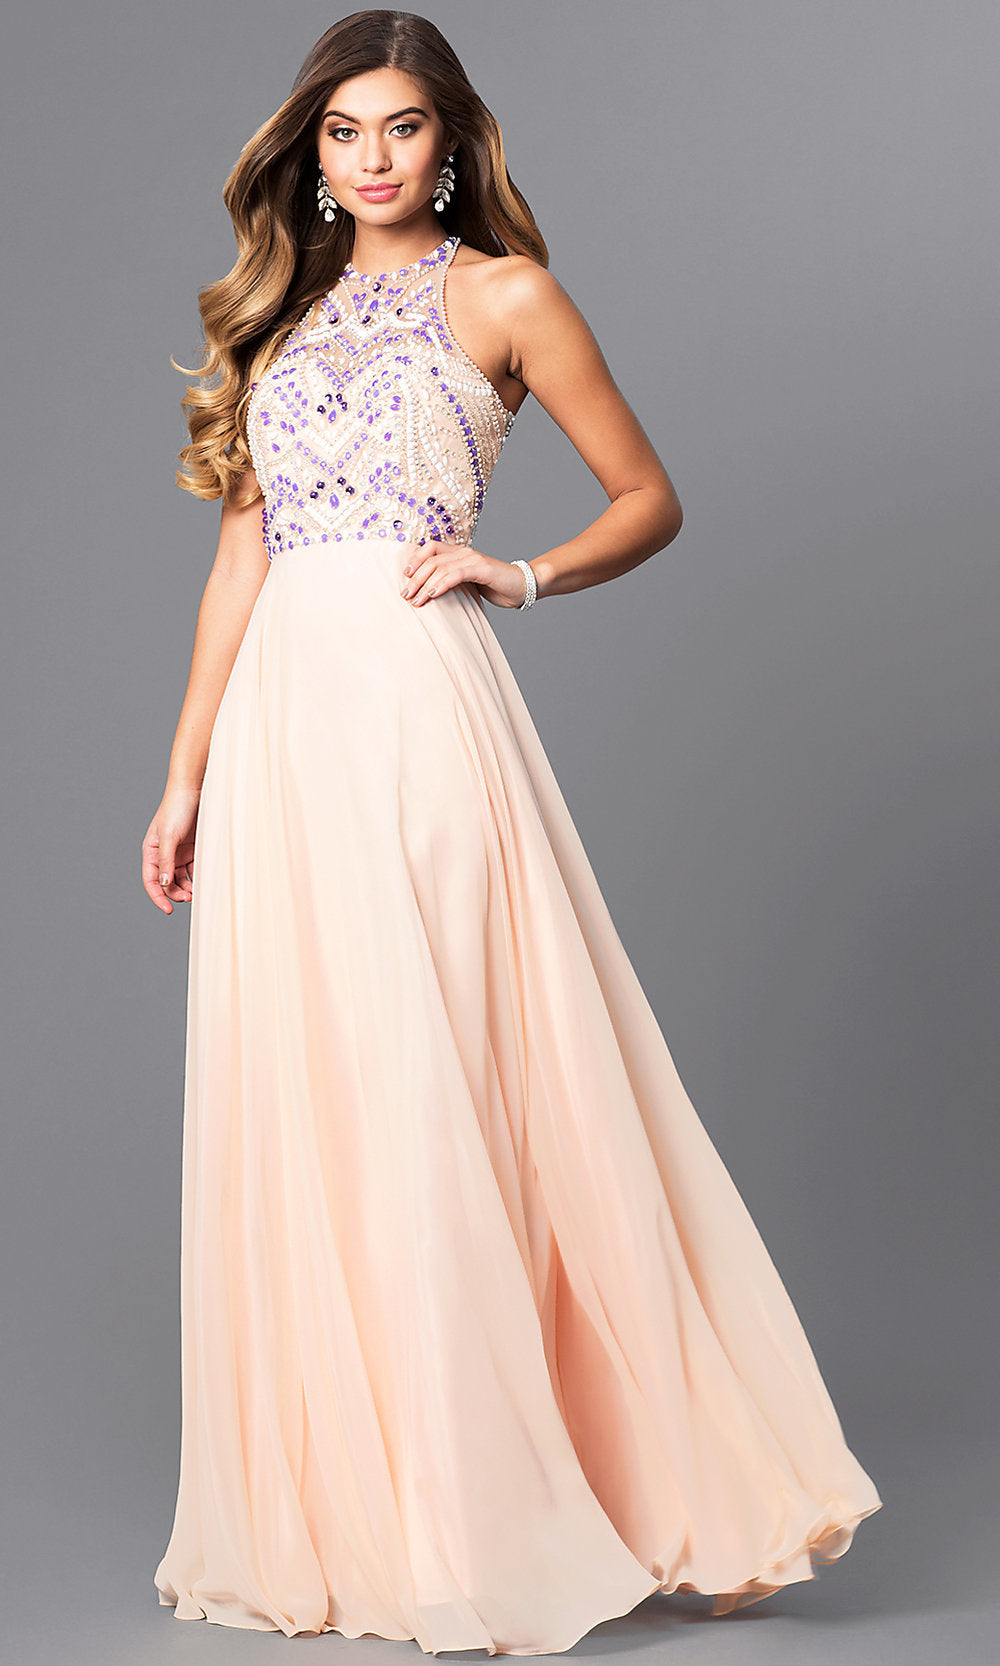 Nude/Purple Long Chiffon Formal Evening Gown with Jeweled Bodice